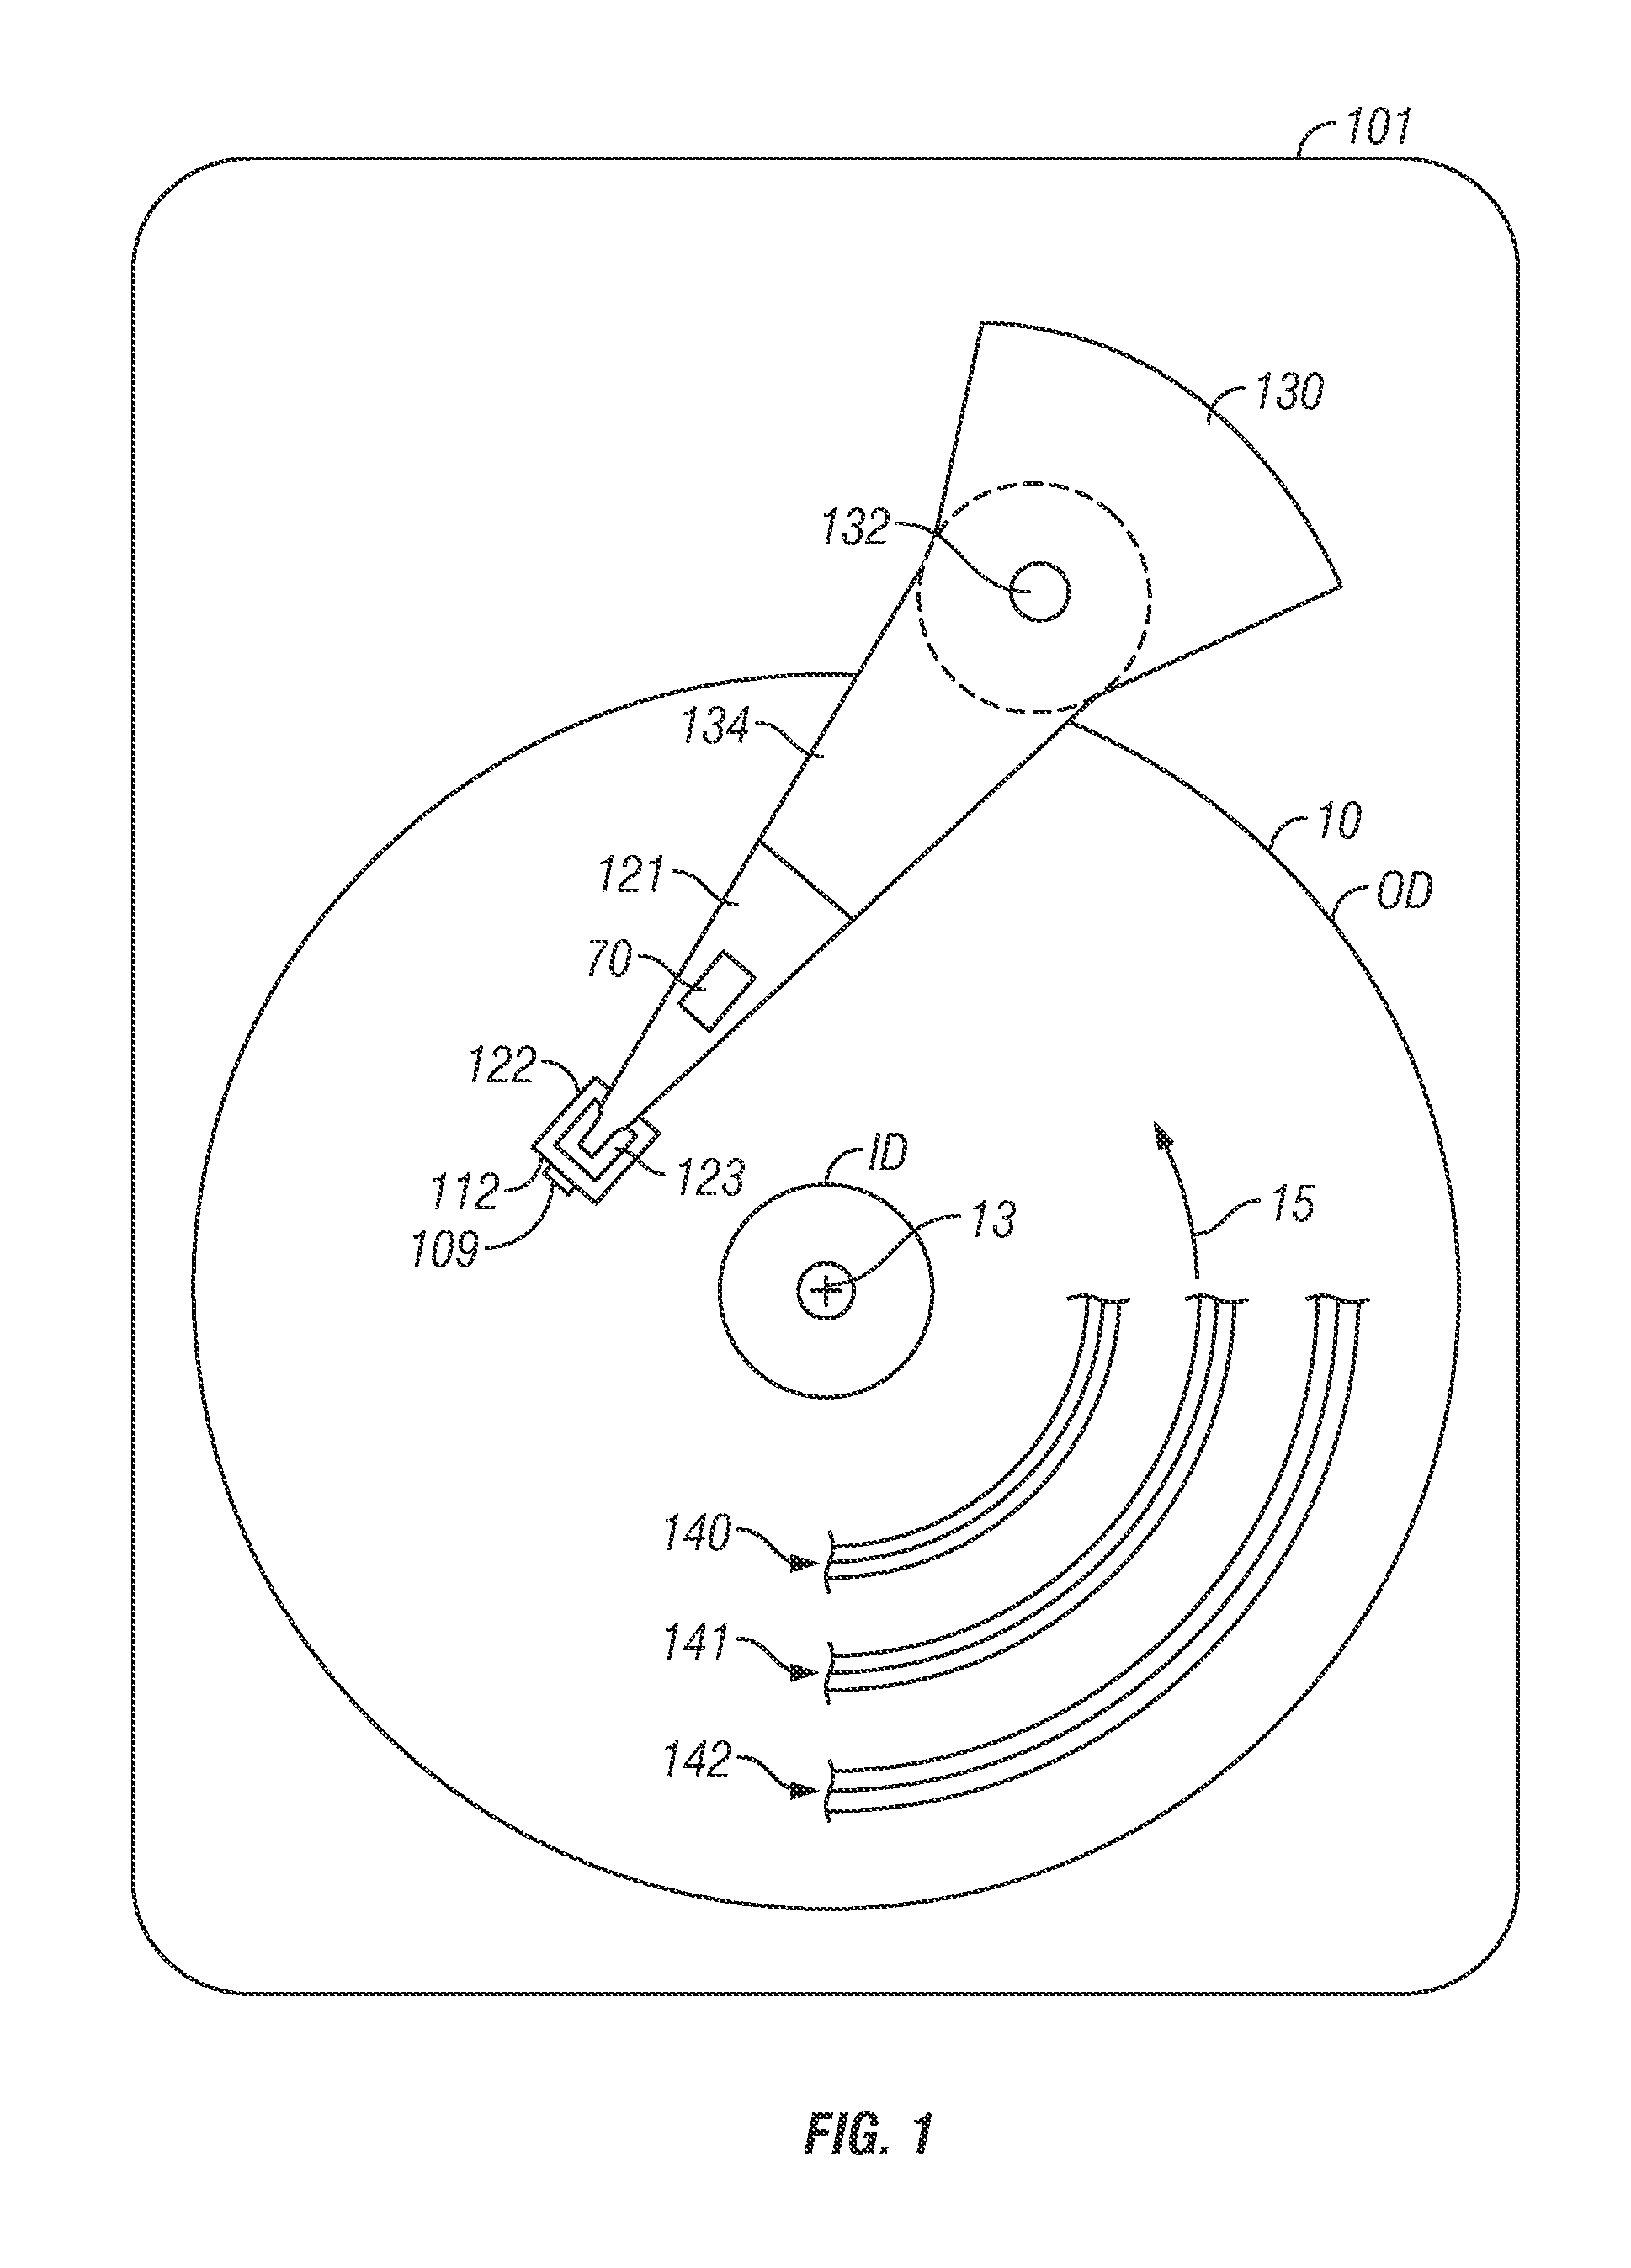 Magnetic recording disk drive with shingled writing and rectangular optical waveguide for wide-area thermal assistance